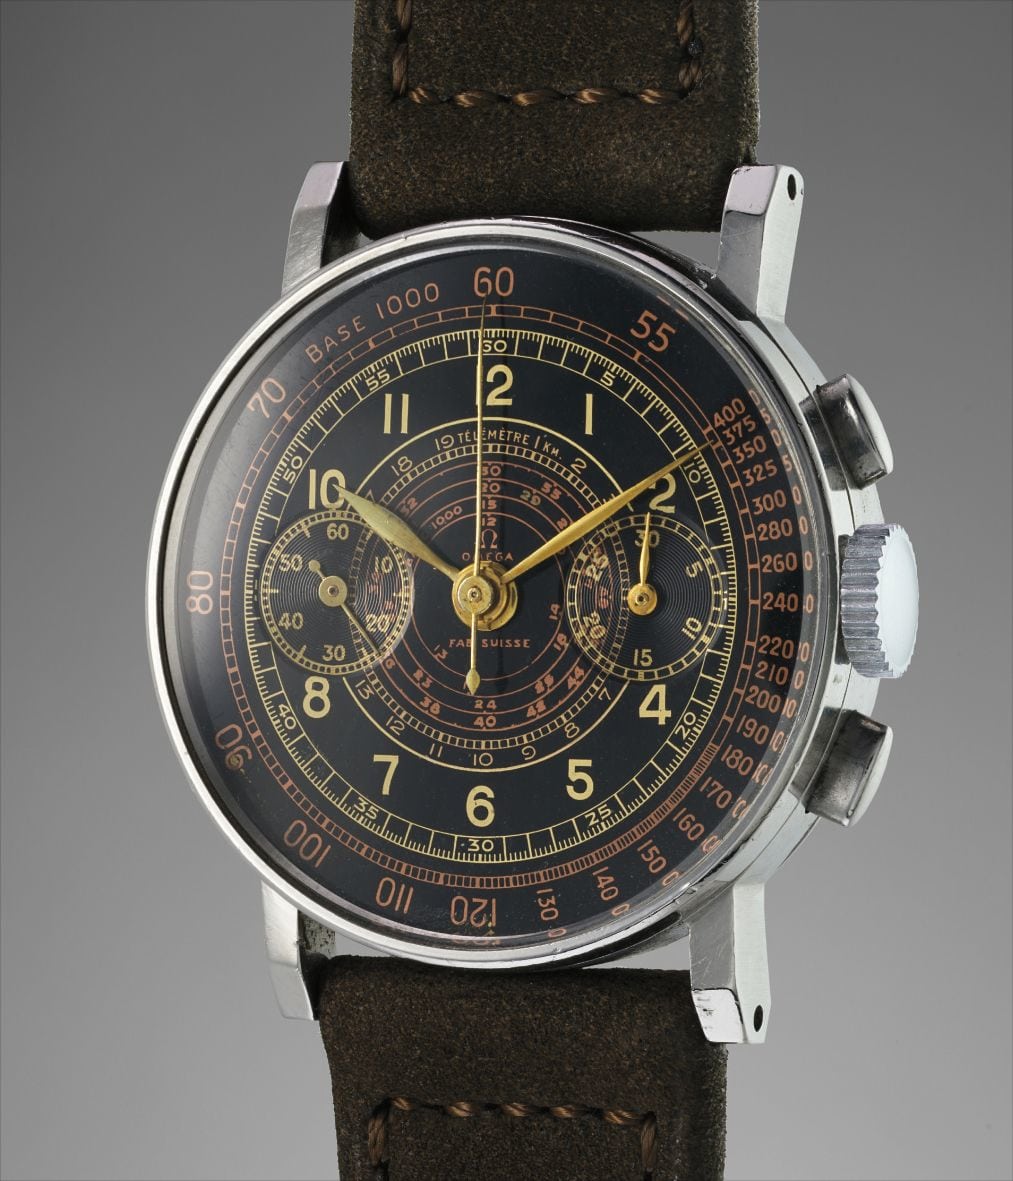 Vintage Omega Chronograph 28.9 CHRO - Image by Phillips Watches